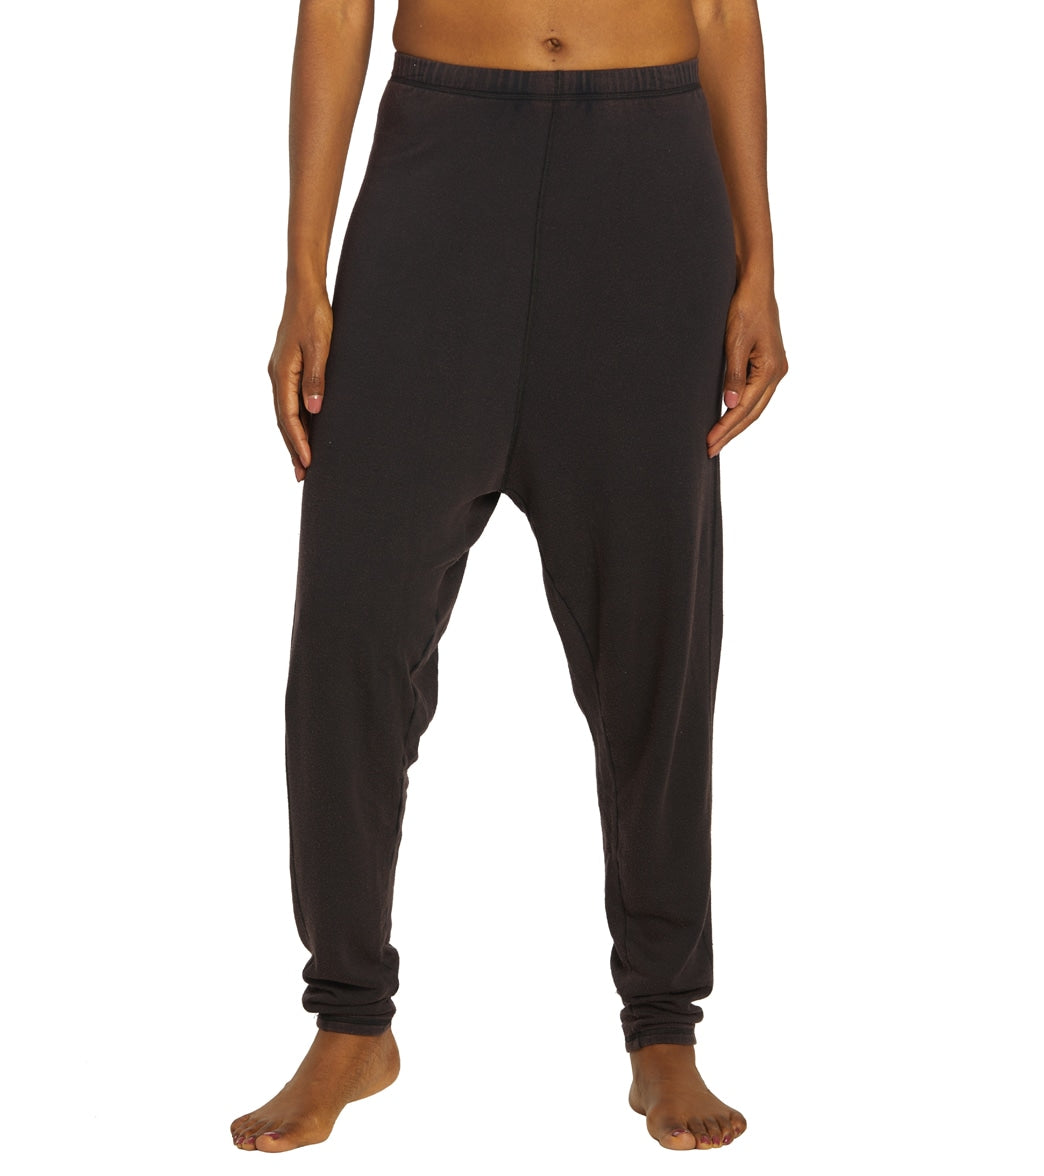 FREE PEOPLE FP Movement - Arena Pants in Black Combo